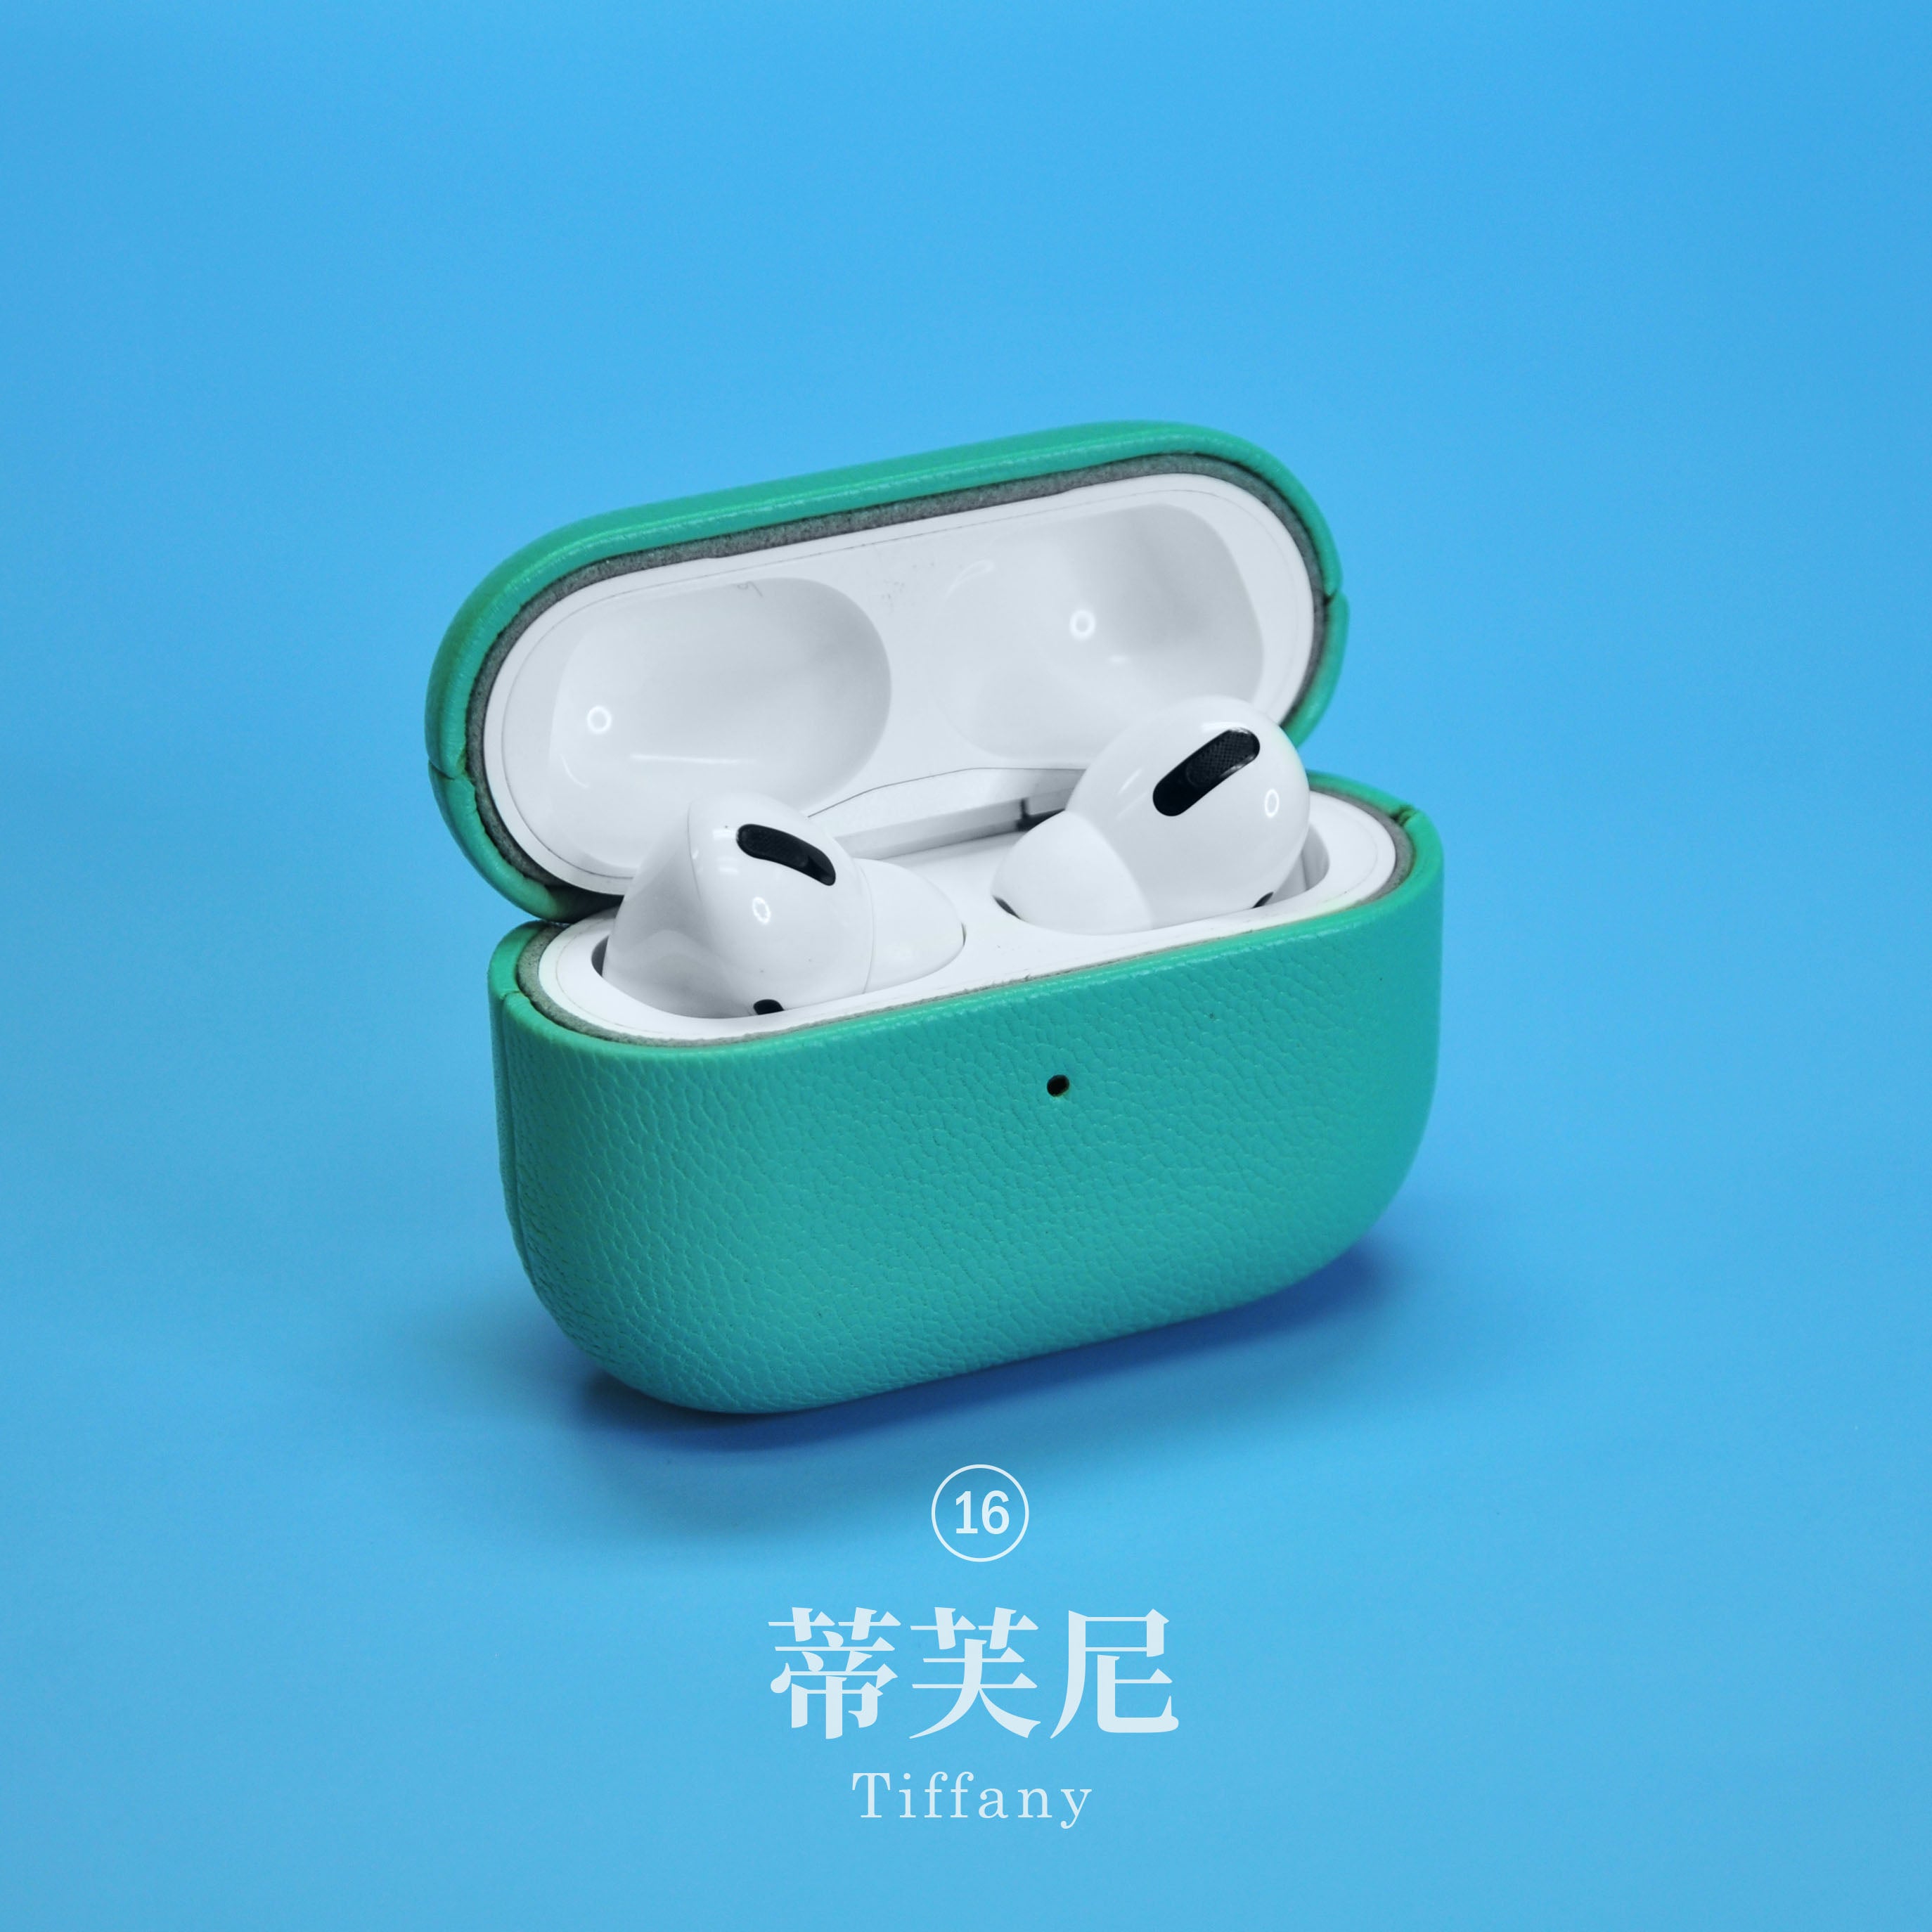 Genuine Leather AirPods Pro Case - Blue Series